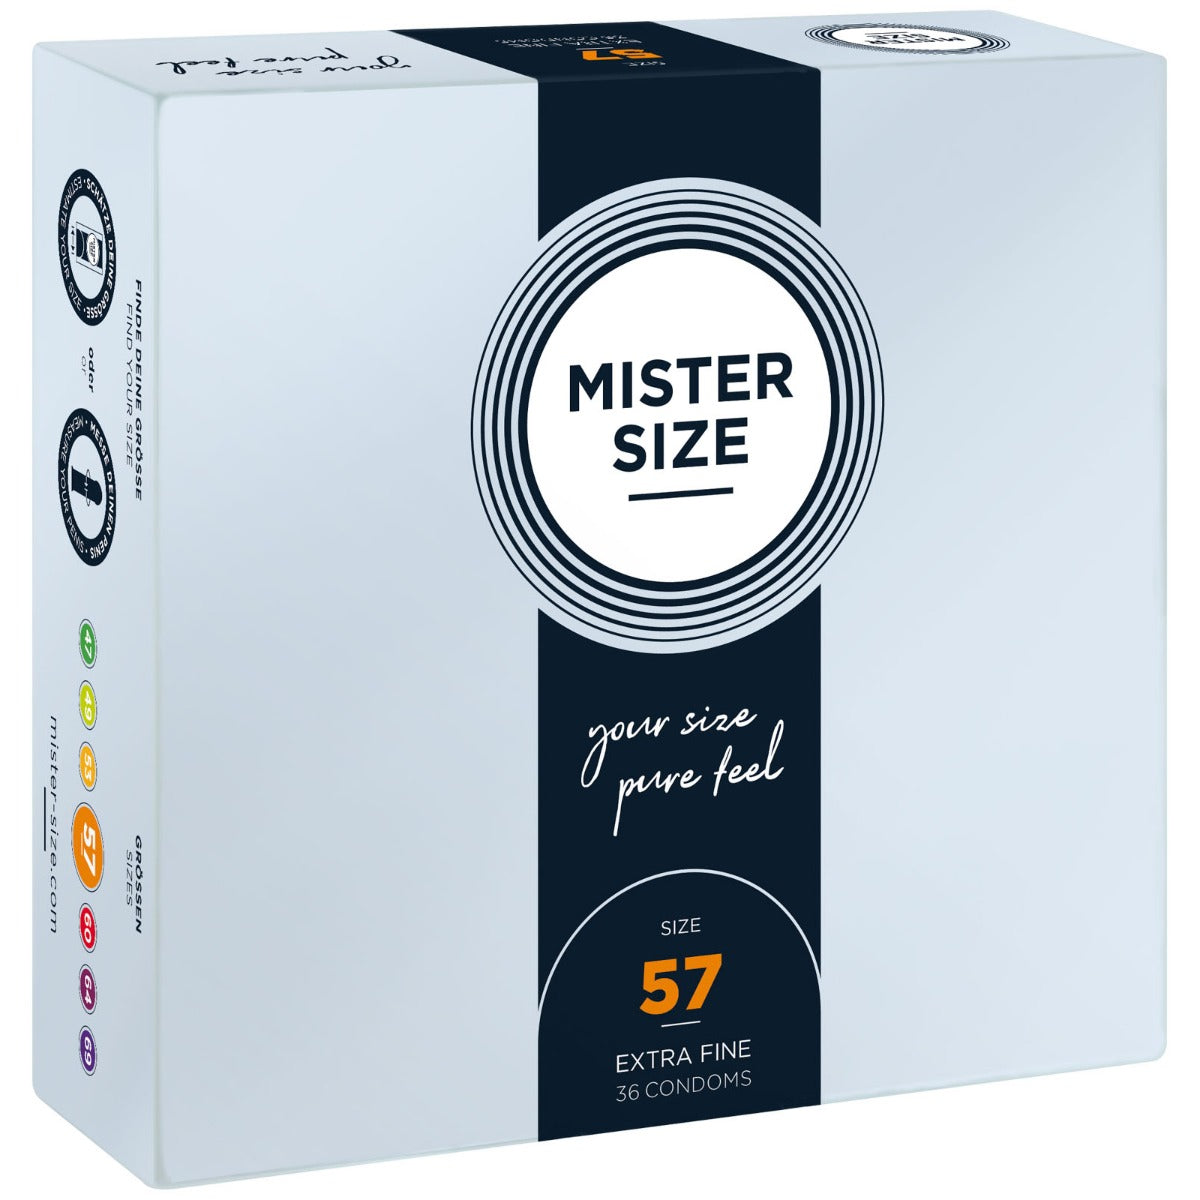 MISTER SIZE | Pure feel Condoms - Size 57 mm (36 pack)